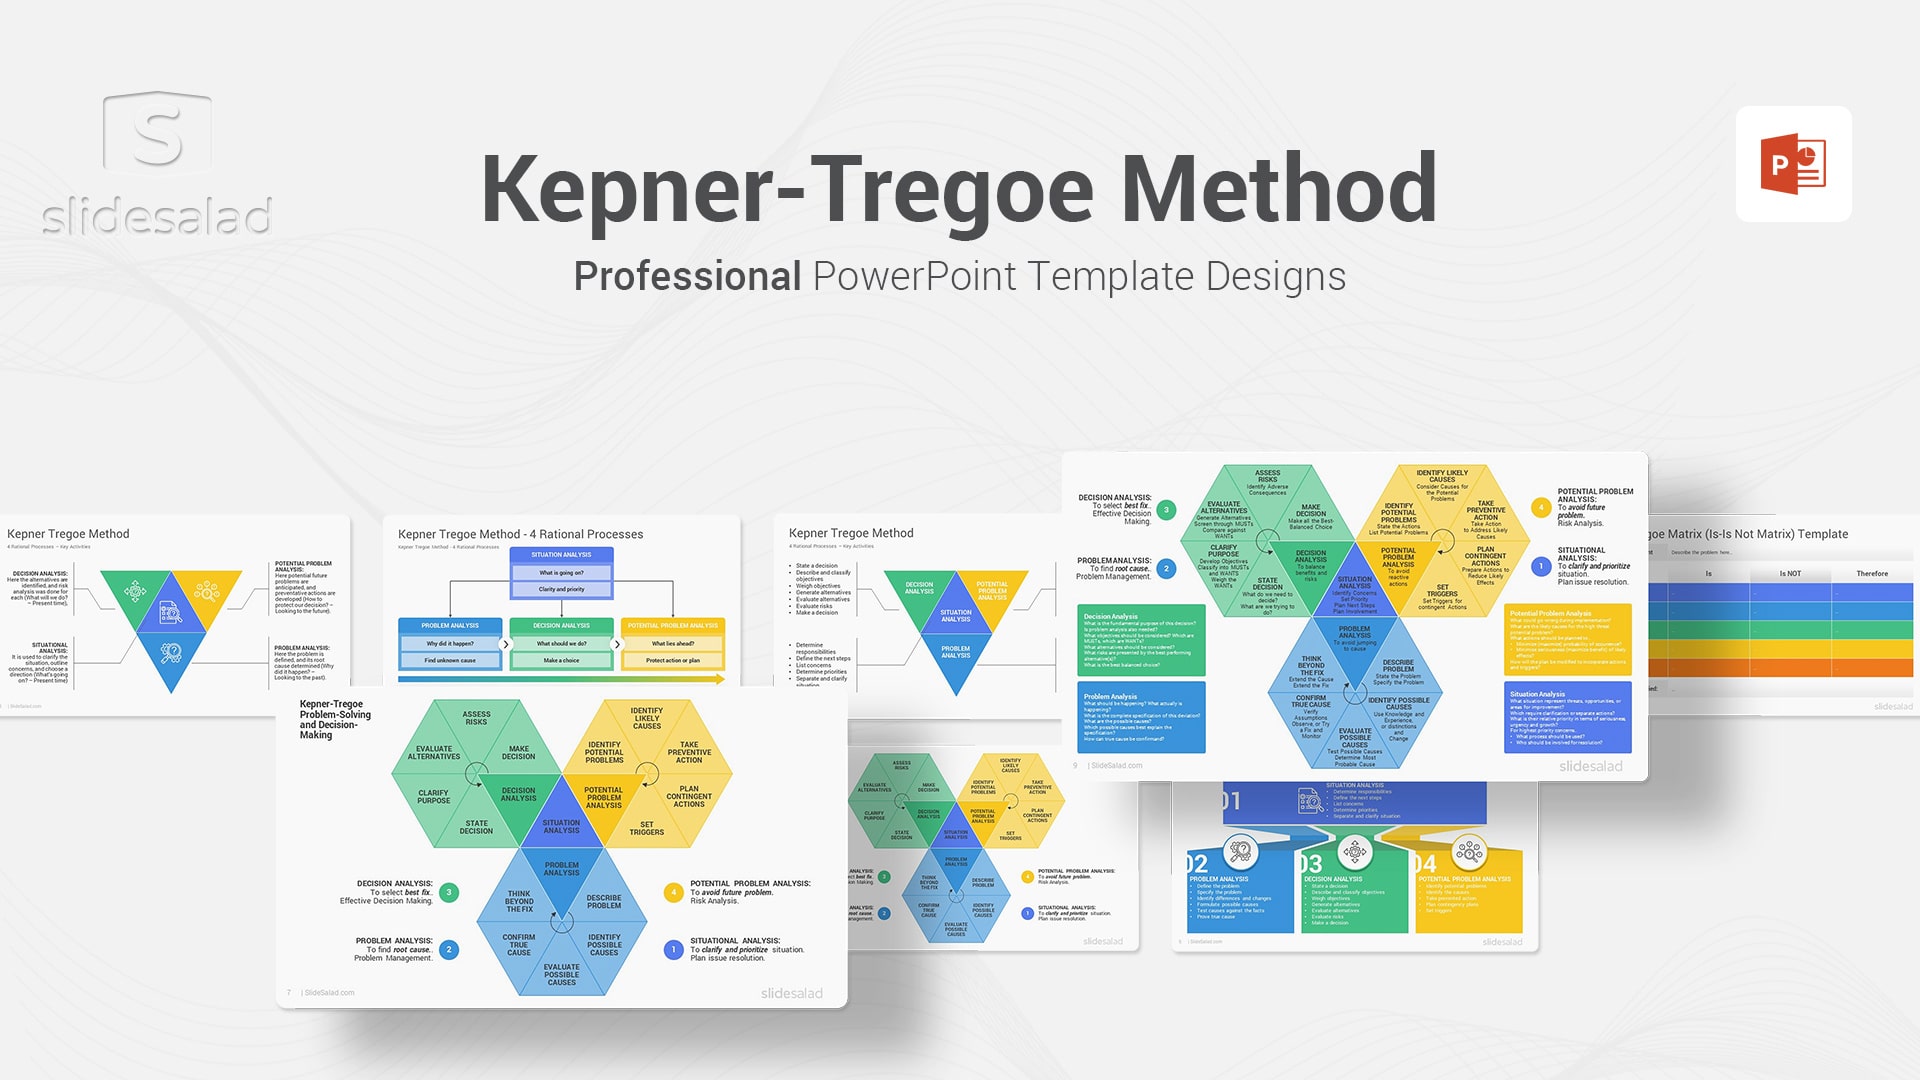 Kepner-Tregoe Method PowerPoint Template - Creative PPT Template to Discover the Practical way to Make the Best Decisions Under Pressure